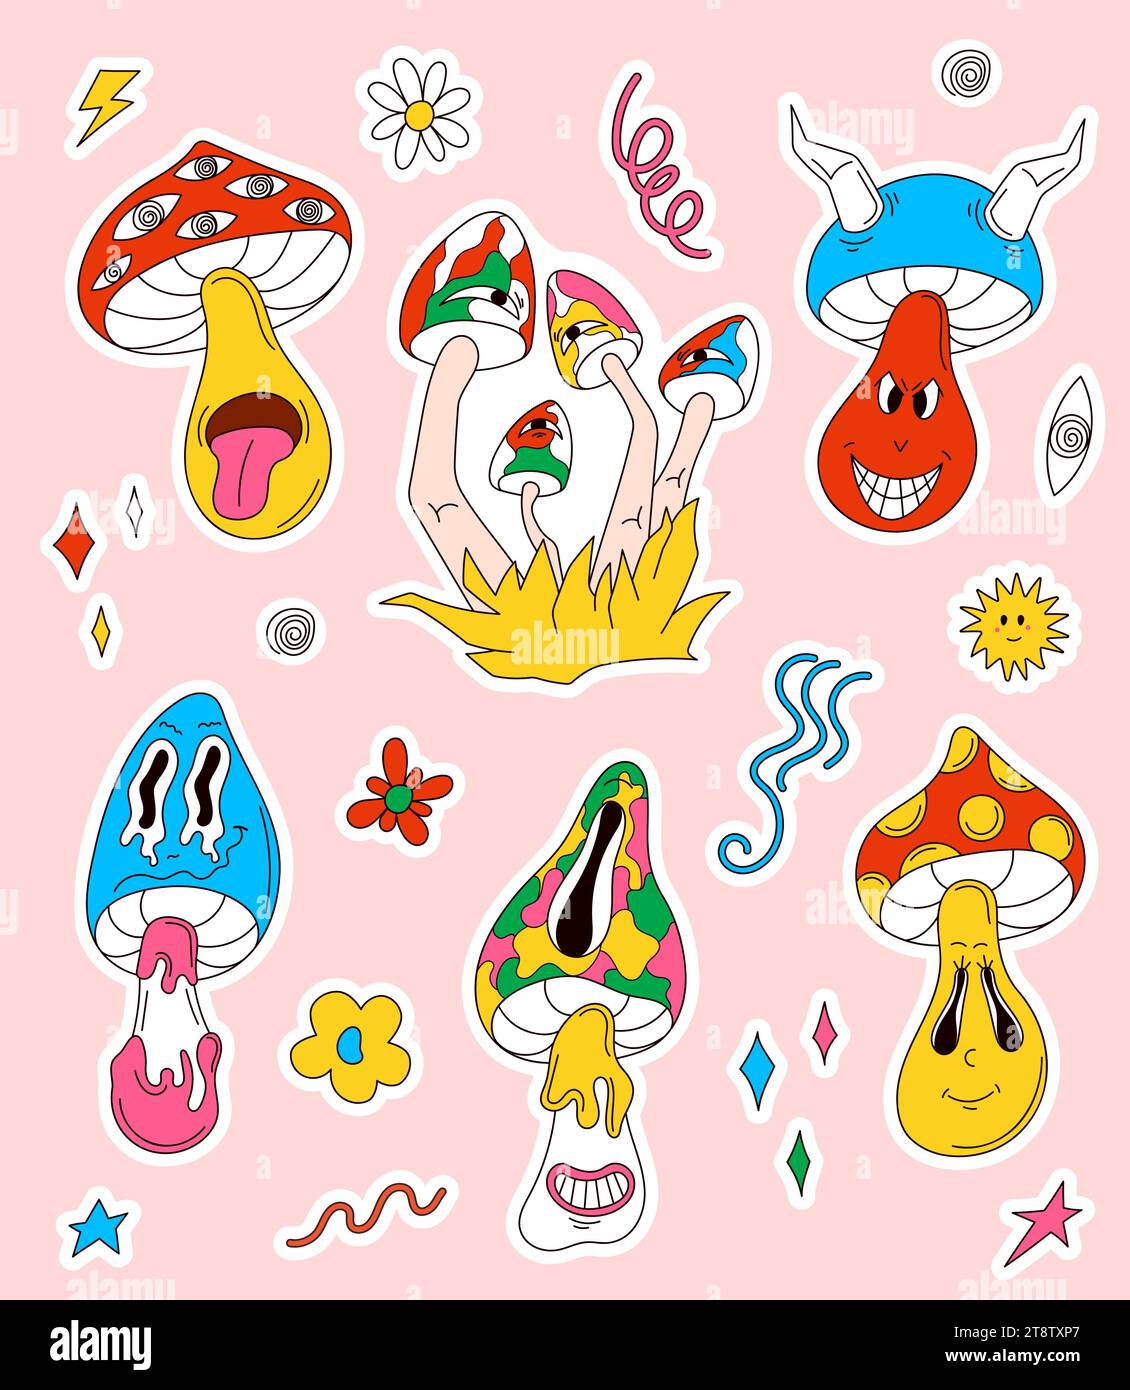 Mushroom groovy character sticker set in cartoon style. Psychedelic characters collection with retro elements and funny faces. Trippy surreal Stock Vector